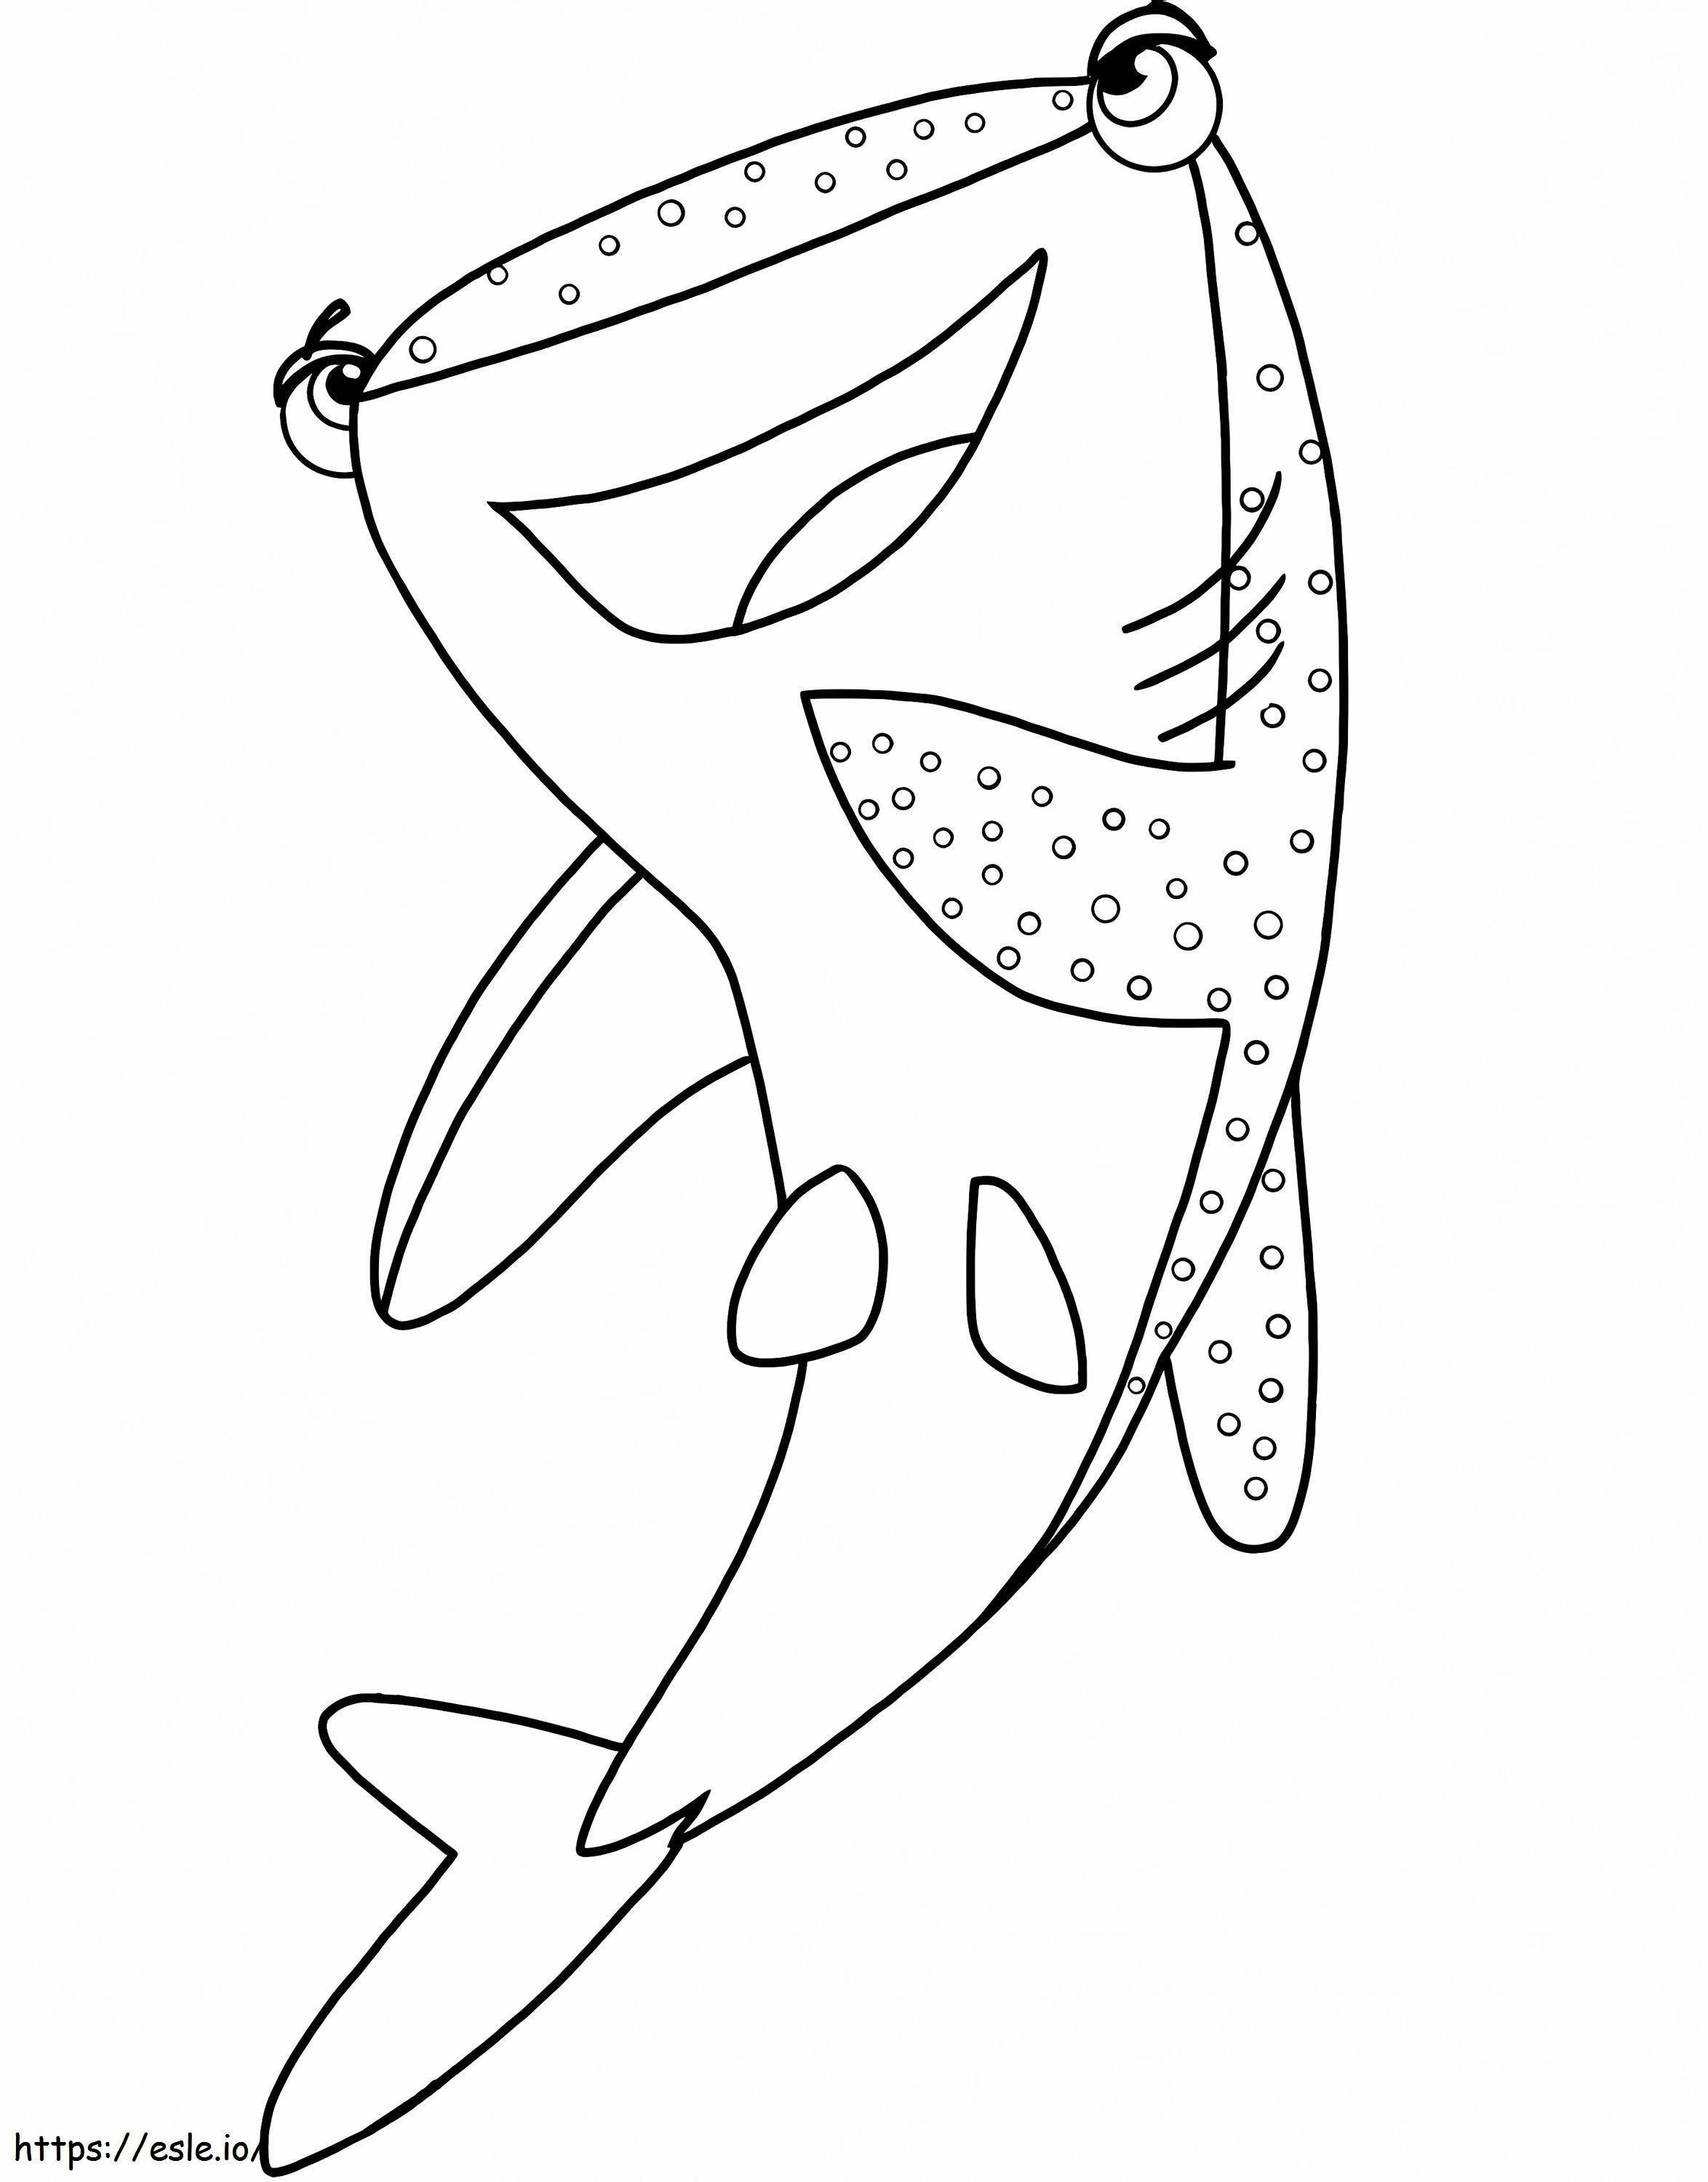 1571360411_Destiny Coloring coloring page